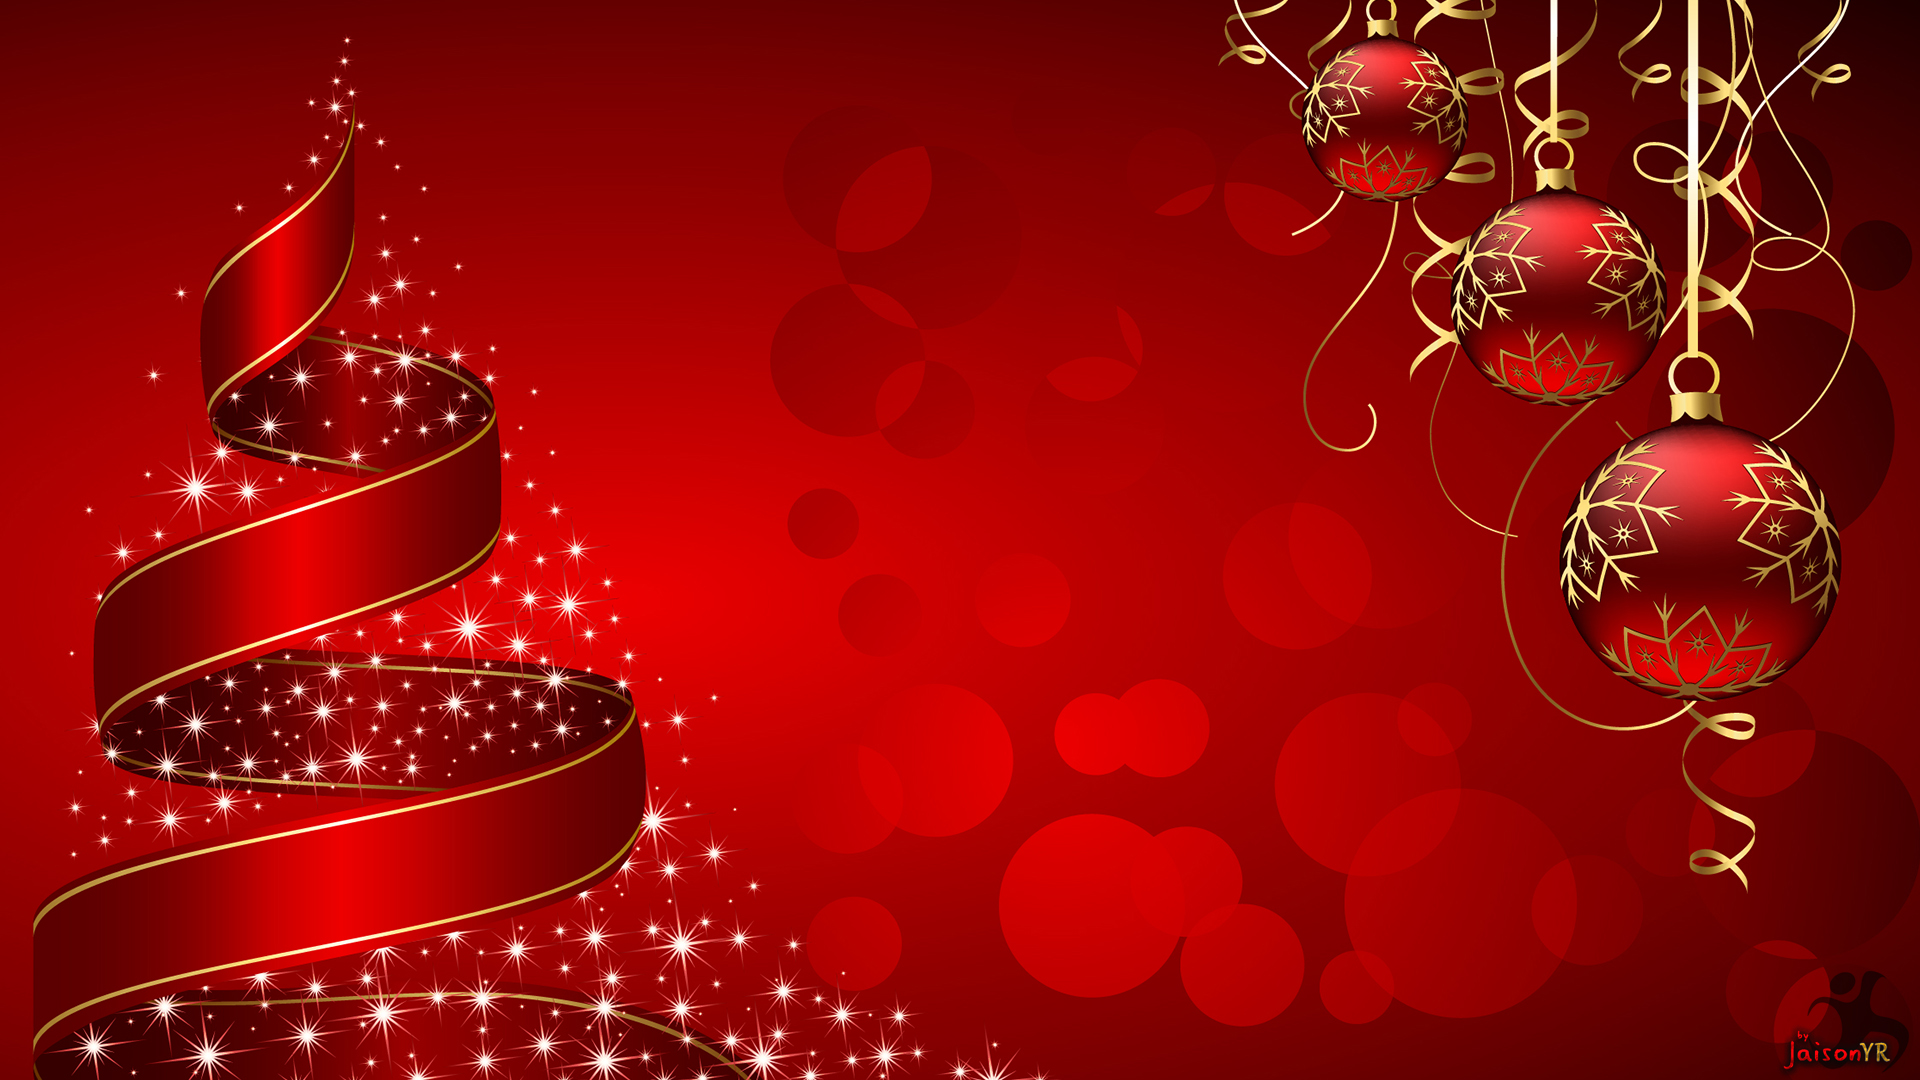 Merry Christmas Exclusive HD Wallpaper